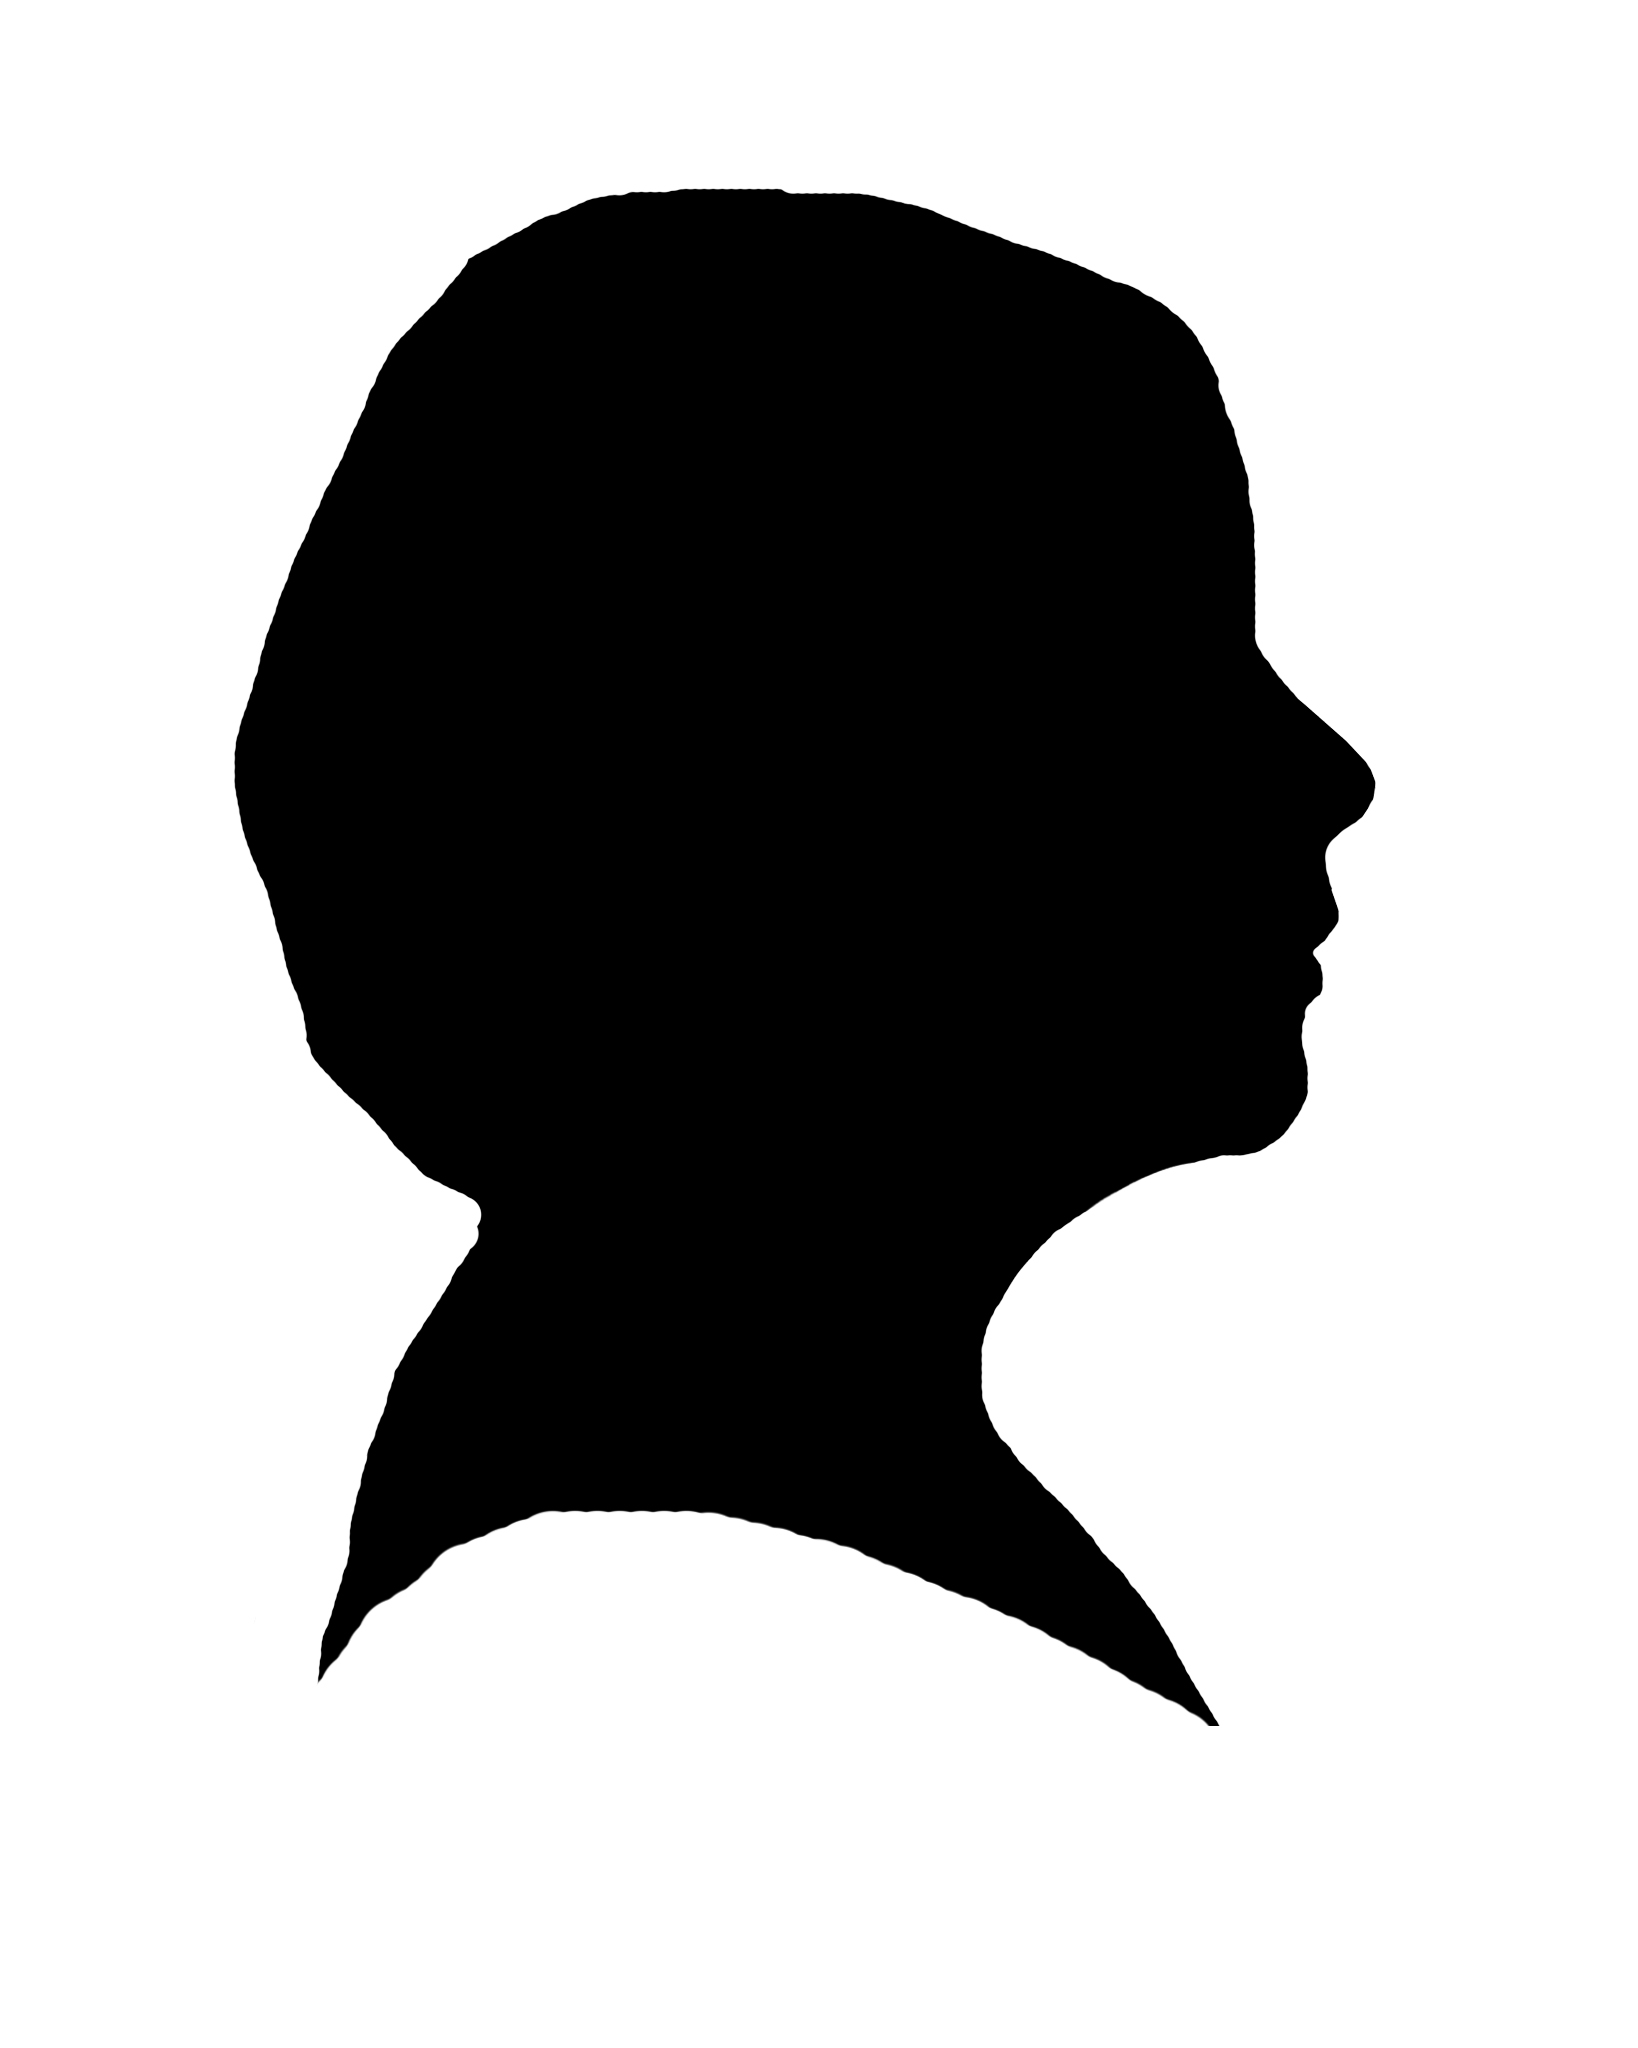 Boy Silhouette by seiyastock on Clipart library